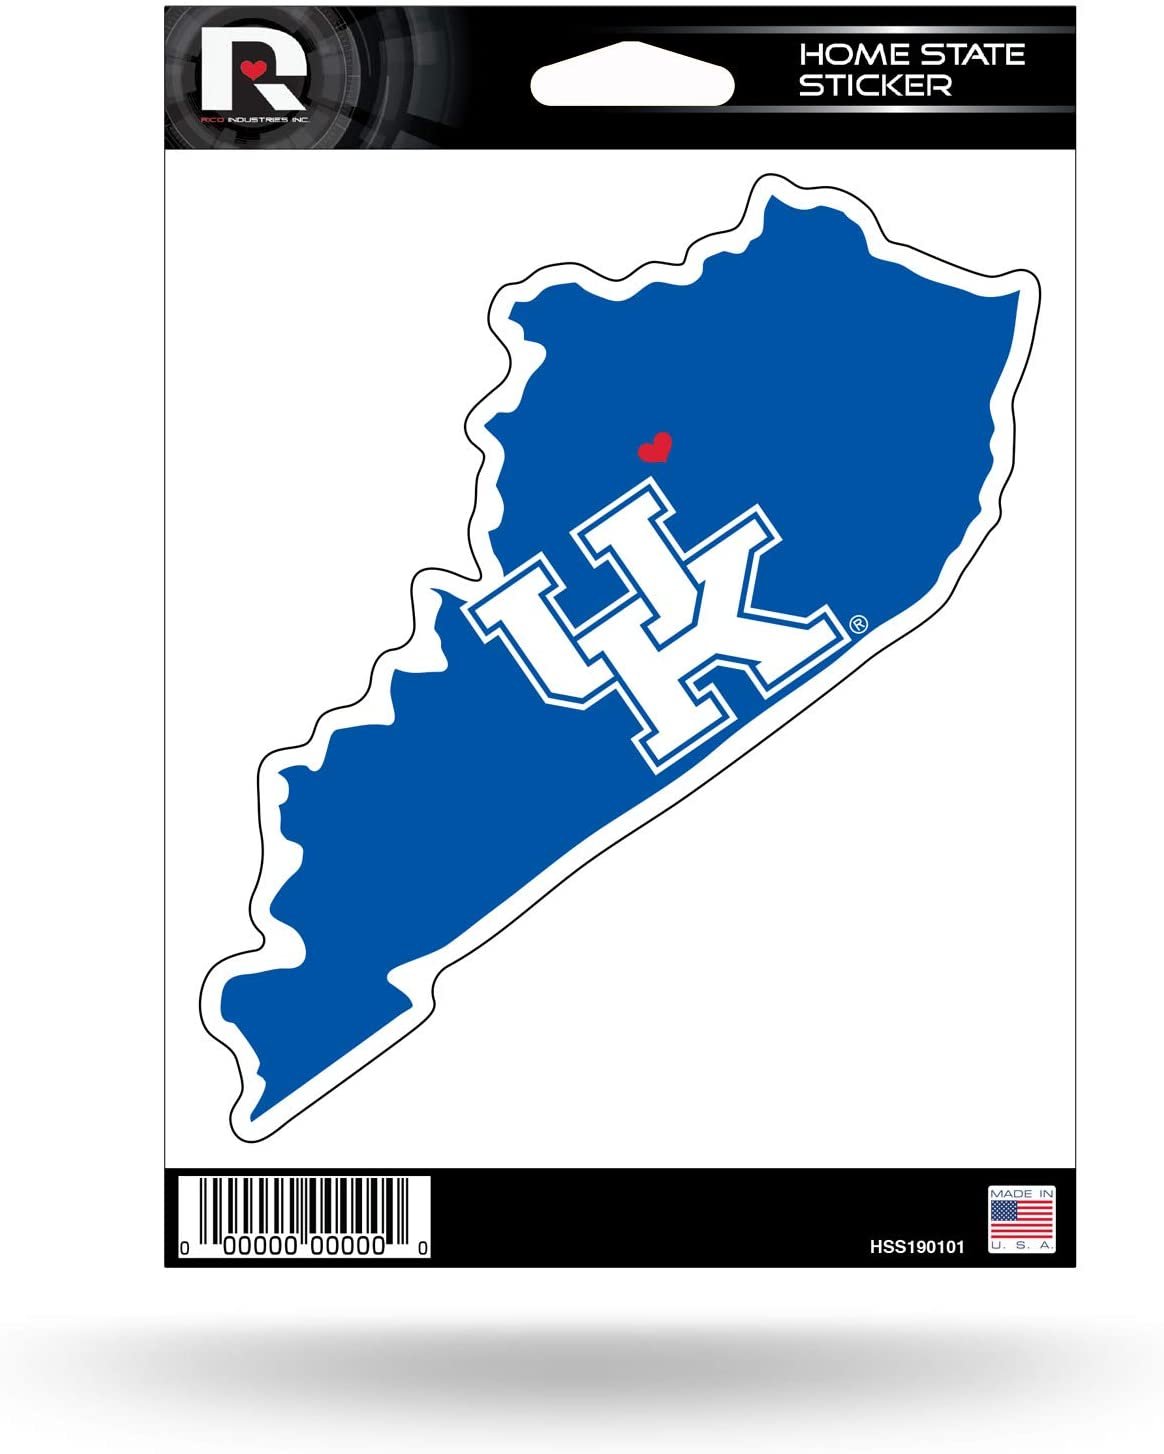 University of Kentucky Wildcats 5 Inch Sticker Decal, Home State Design, Flat Vinyl, Full Adhesive Backing